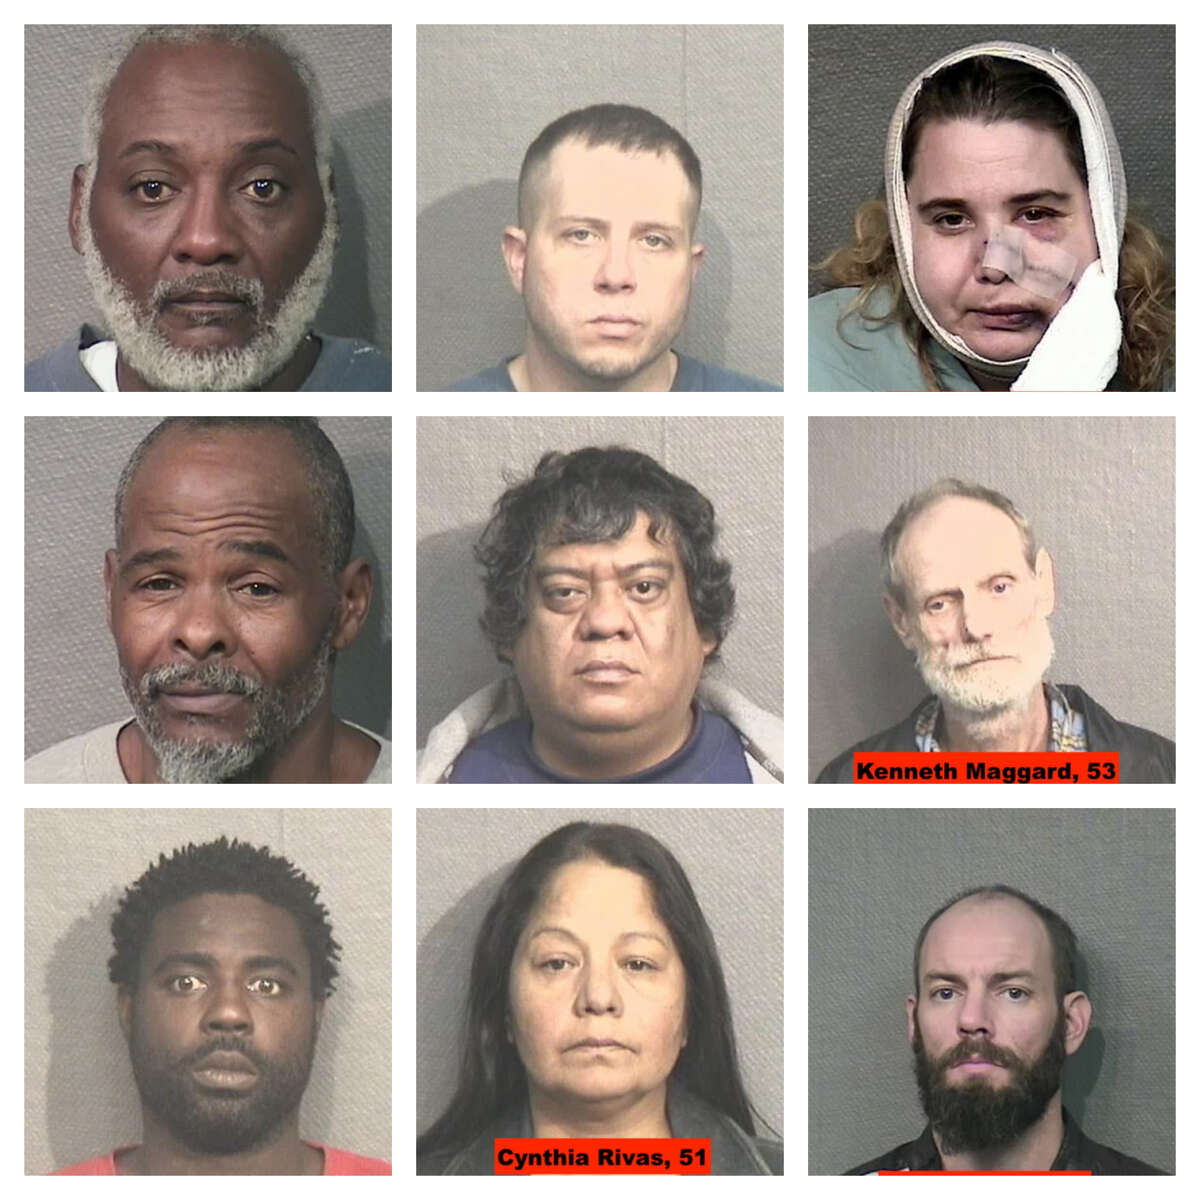 PHOTOS: Regional parole violator operation nets 164 arrests  The Houston Police Department recently announced 164 arrests related to a regional effort targeting wanted parole violators. >>> See the 86 people arrested by Houston police arrested in the slideshow 